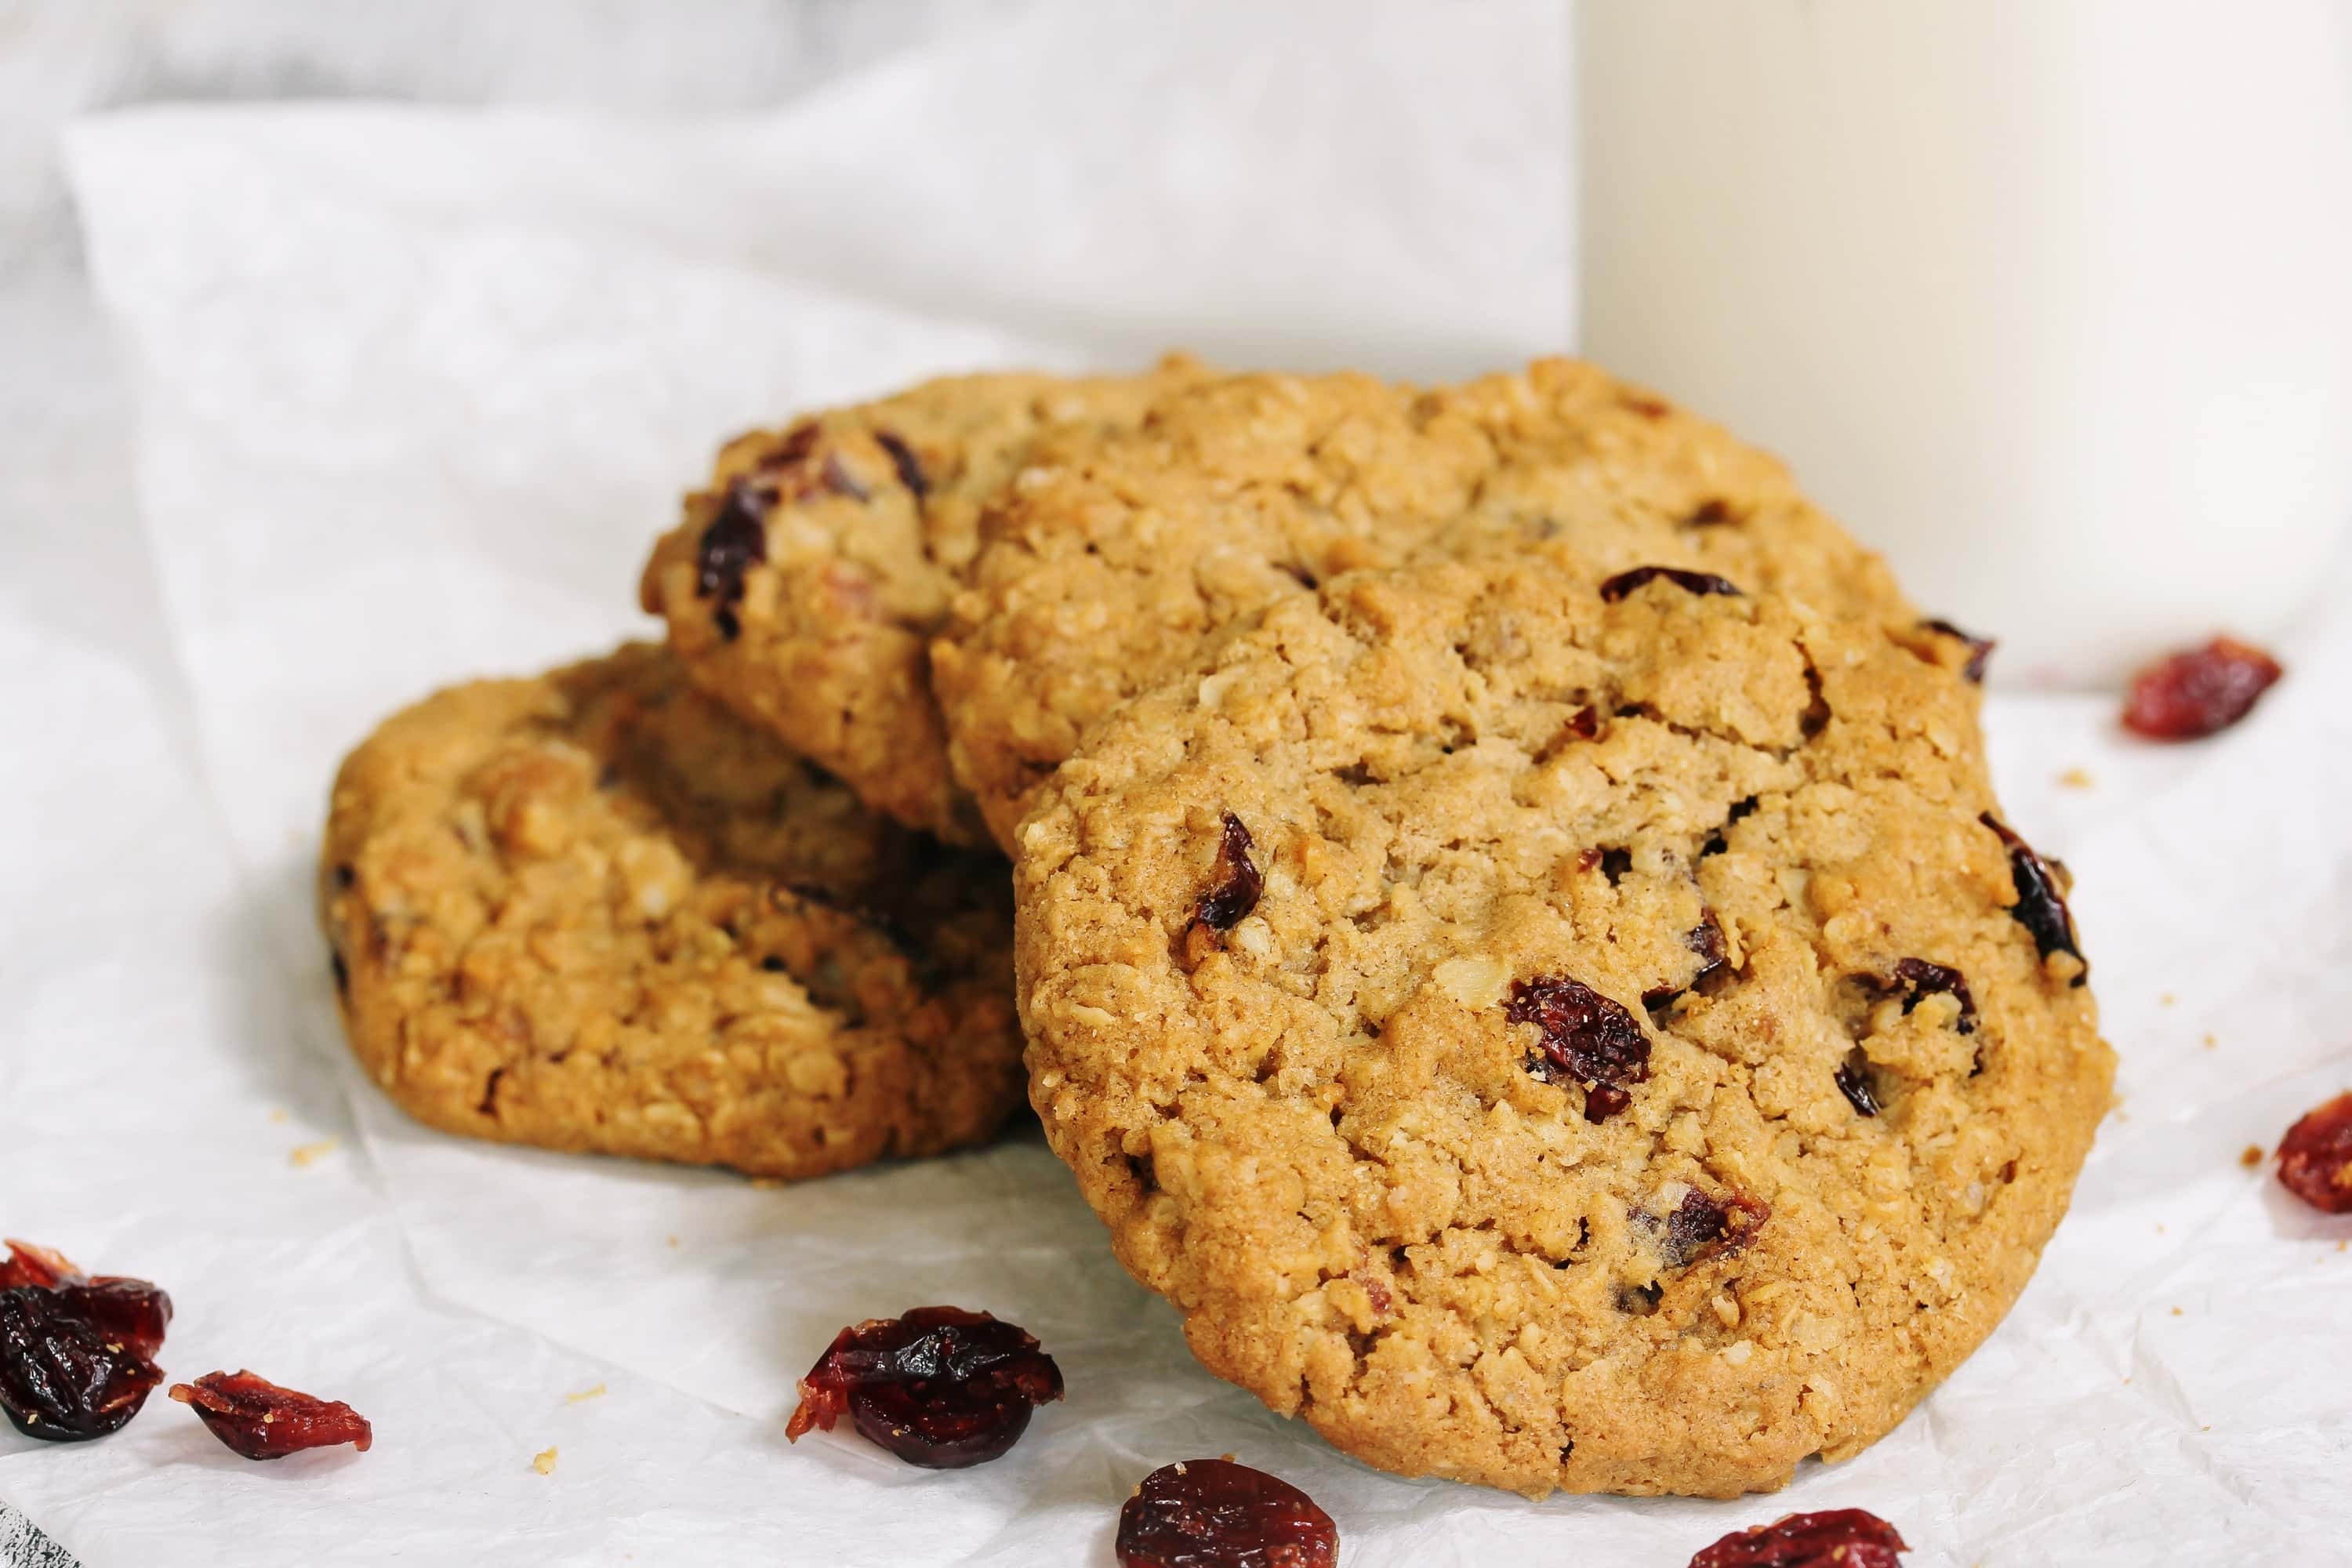 Homemade Cranberry cookies with a bottle of milk on side, selective focus